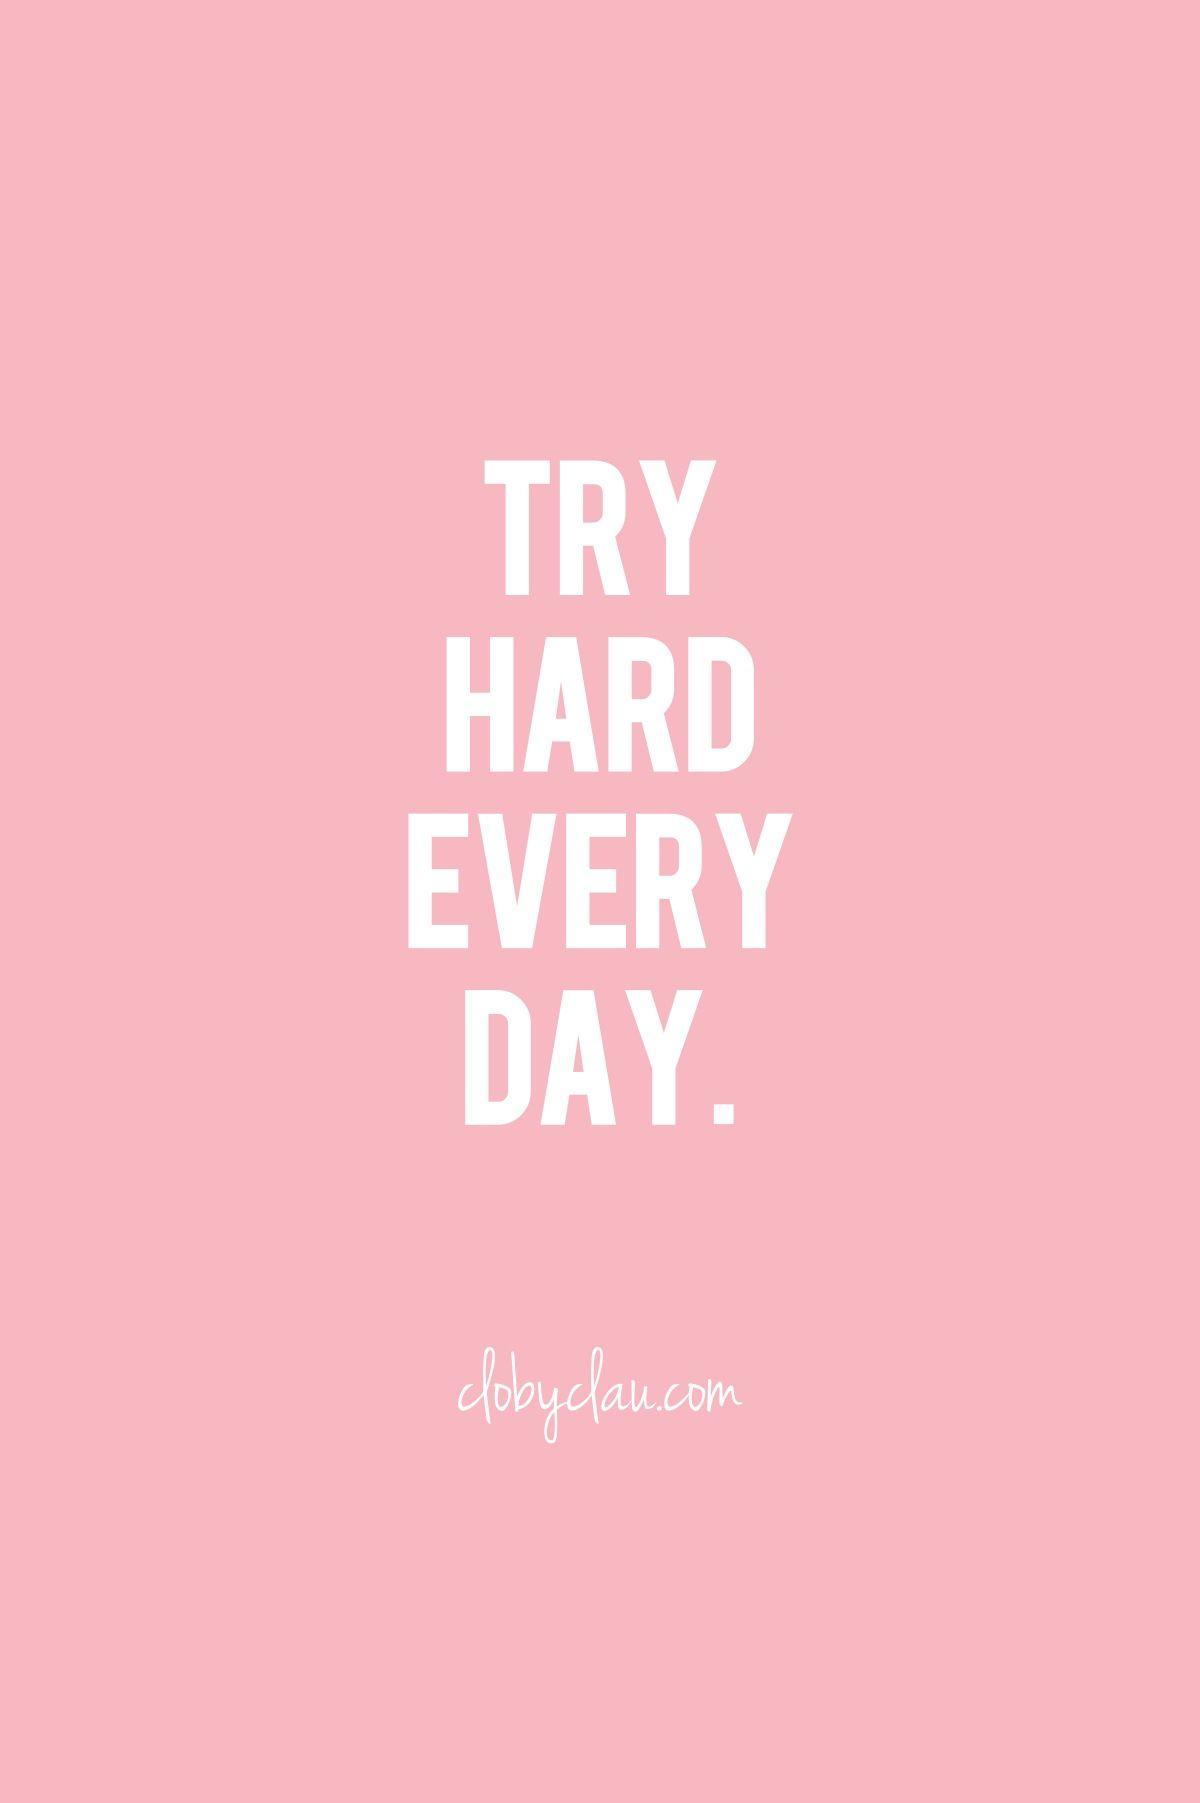 Try Hard Every Day. clobyclau.com #inspirational #quote #quotes